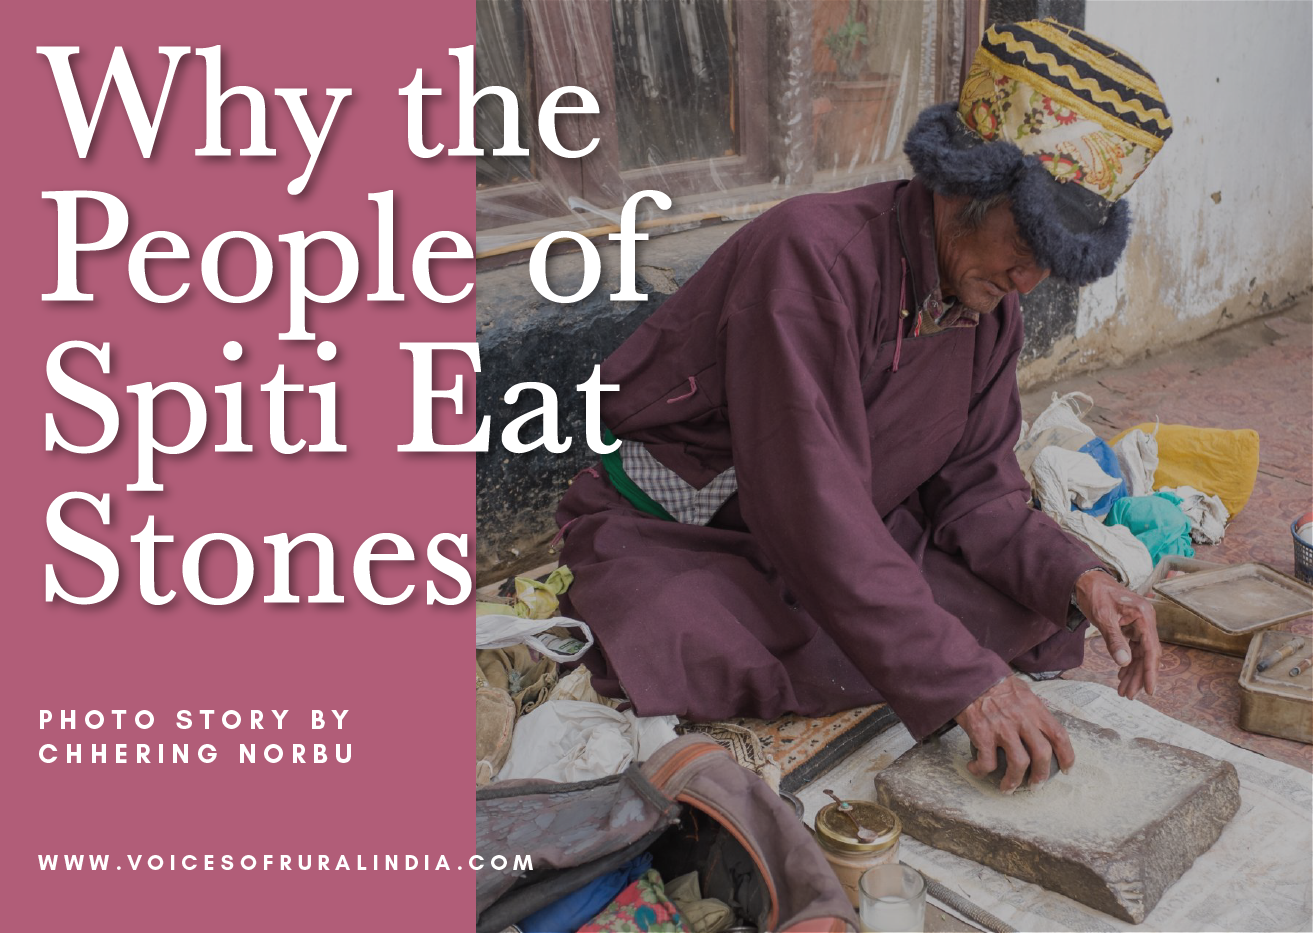 Why the People of Spiti Eat Stones